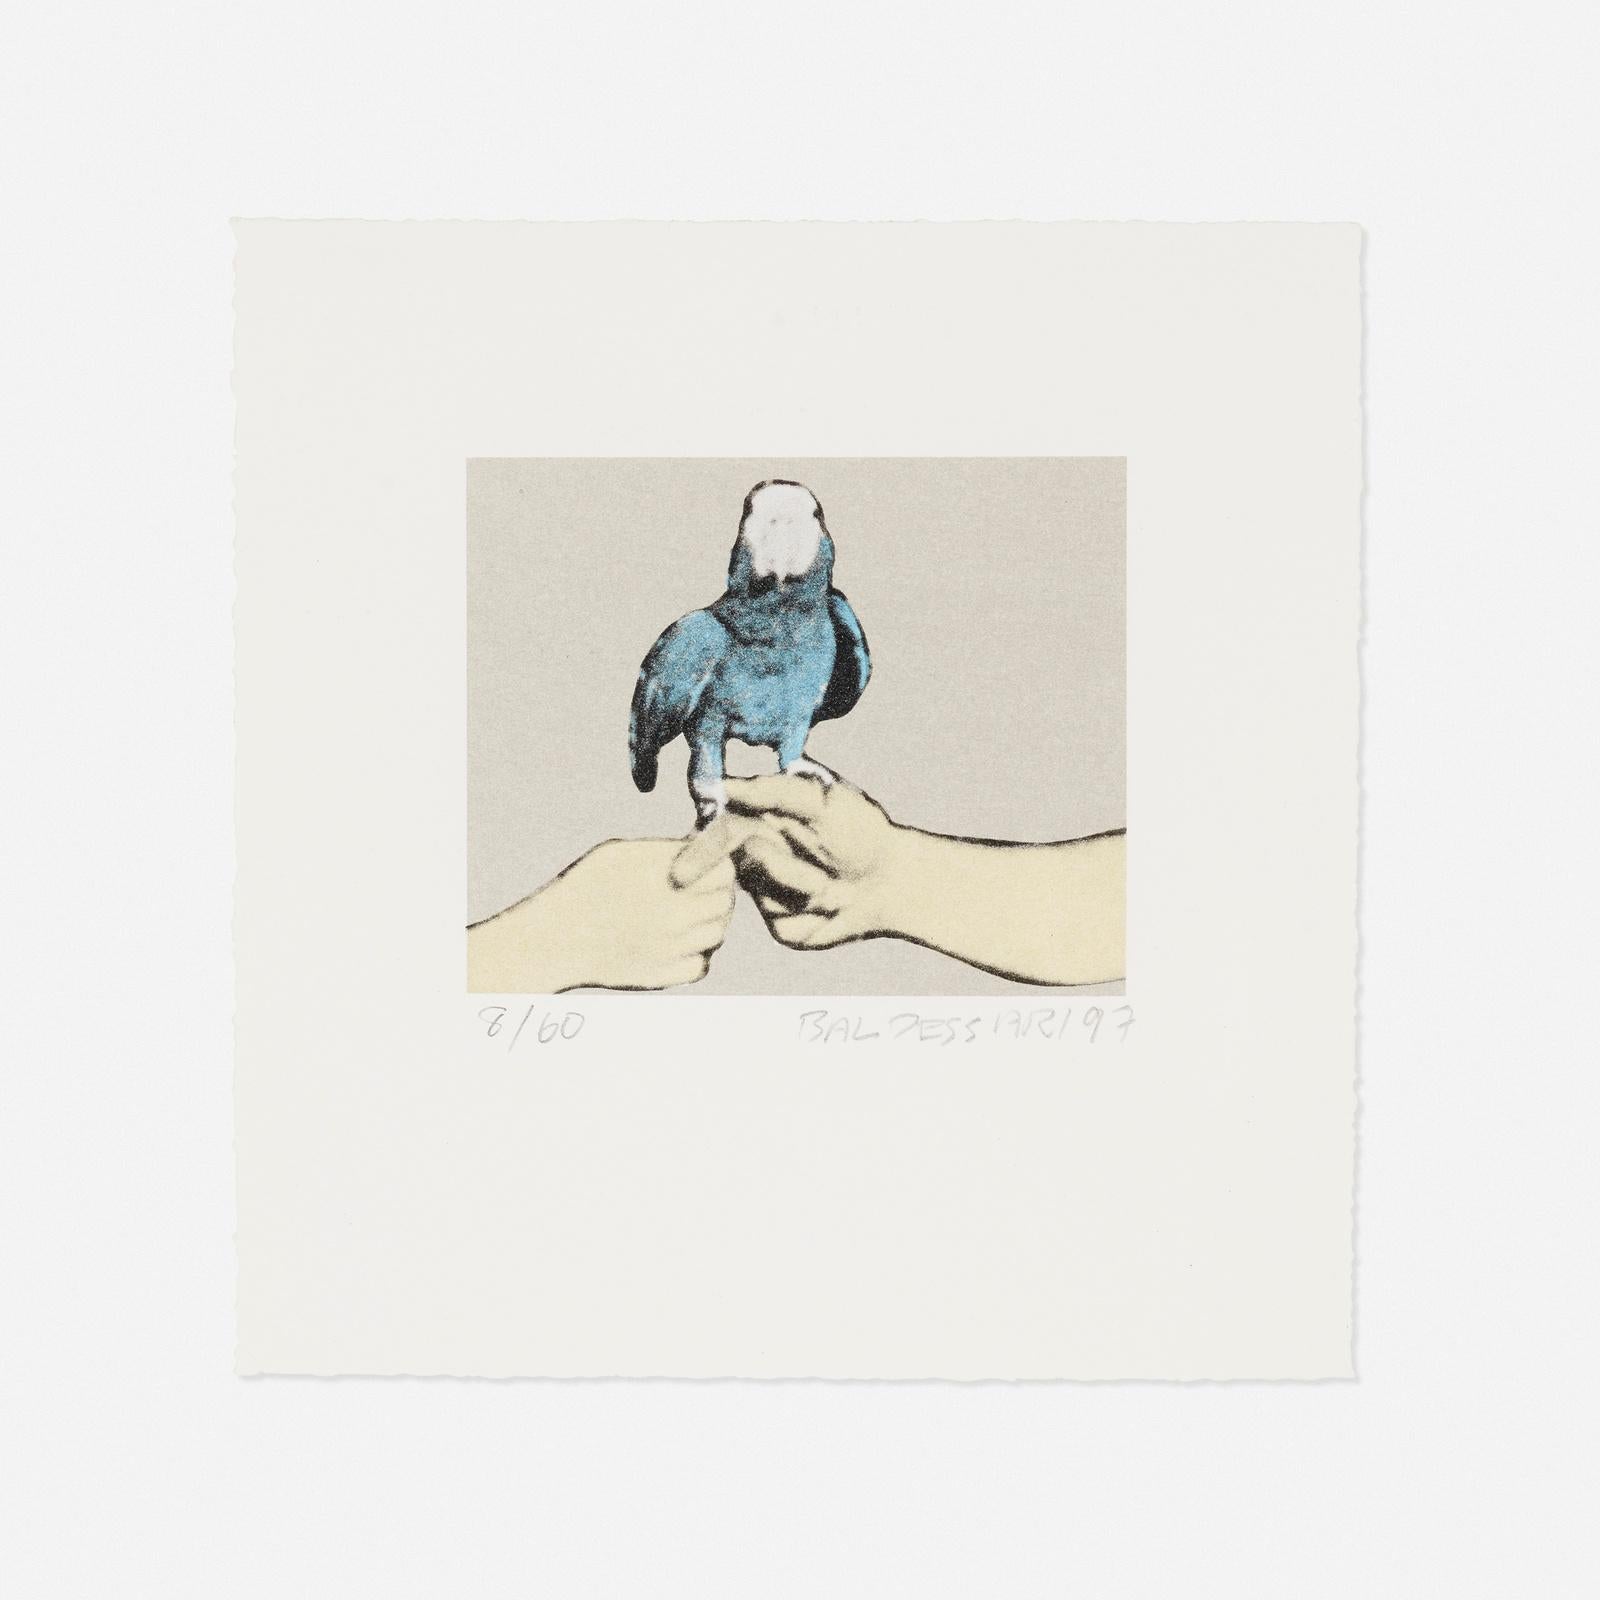 John Baldessari (1931–2020)
Panel #2 , 1997
From series Two Horses with Riders (with Blue Parrot)
Lithograph in colors on Rives BFK paper
Signed, dated and numbered to lower edge ‘8/60 Baldessari 97’. 
Edition 8 of 60.
Sheet: 7½ h × 7¼ w in 
Image: